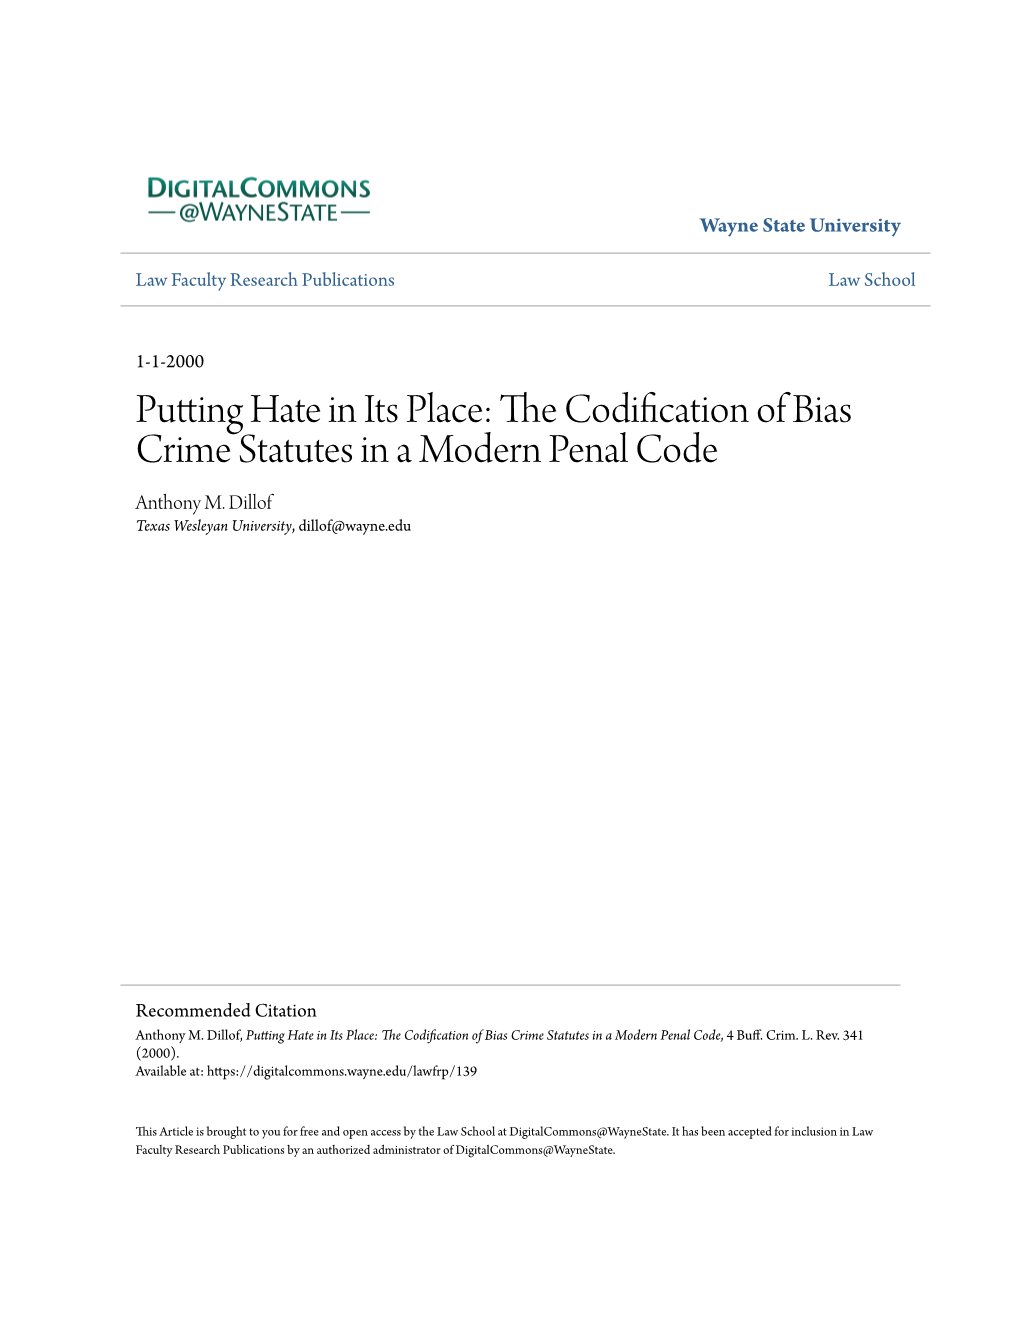 The Codification of Bias Crime Statutes in a Modern Penal Code, 4 Buff